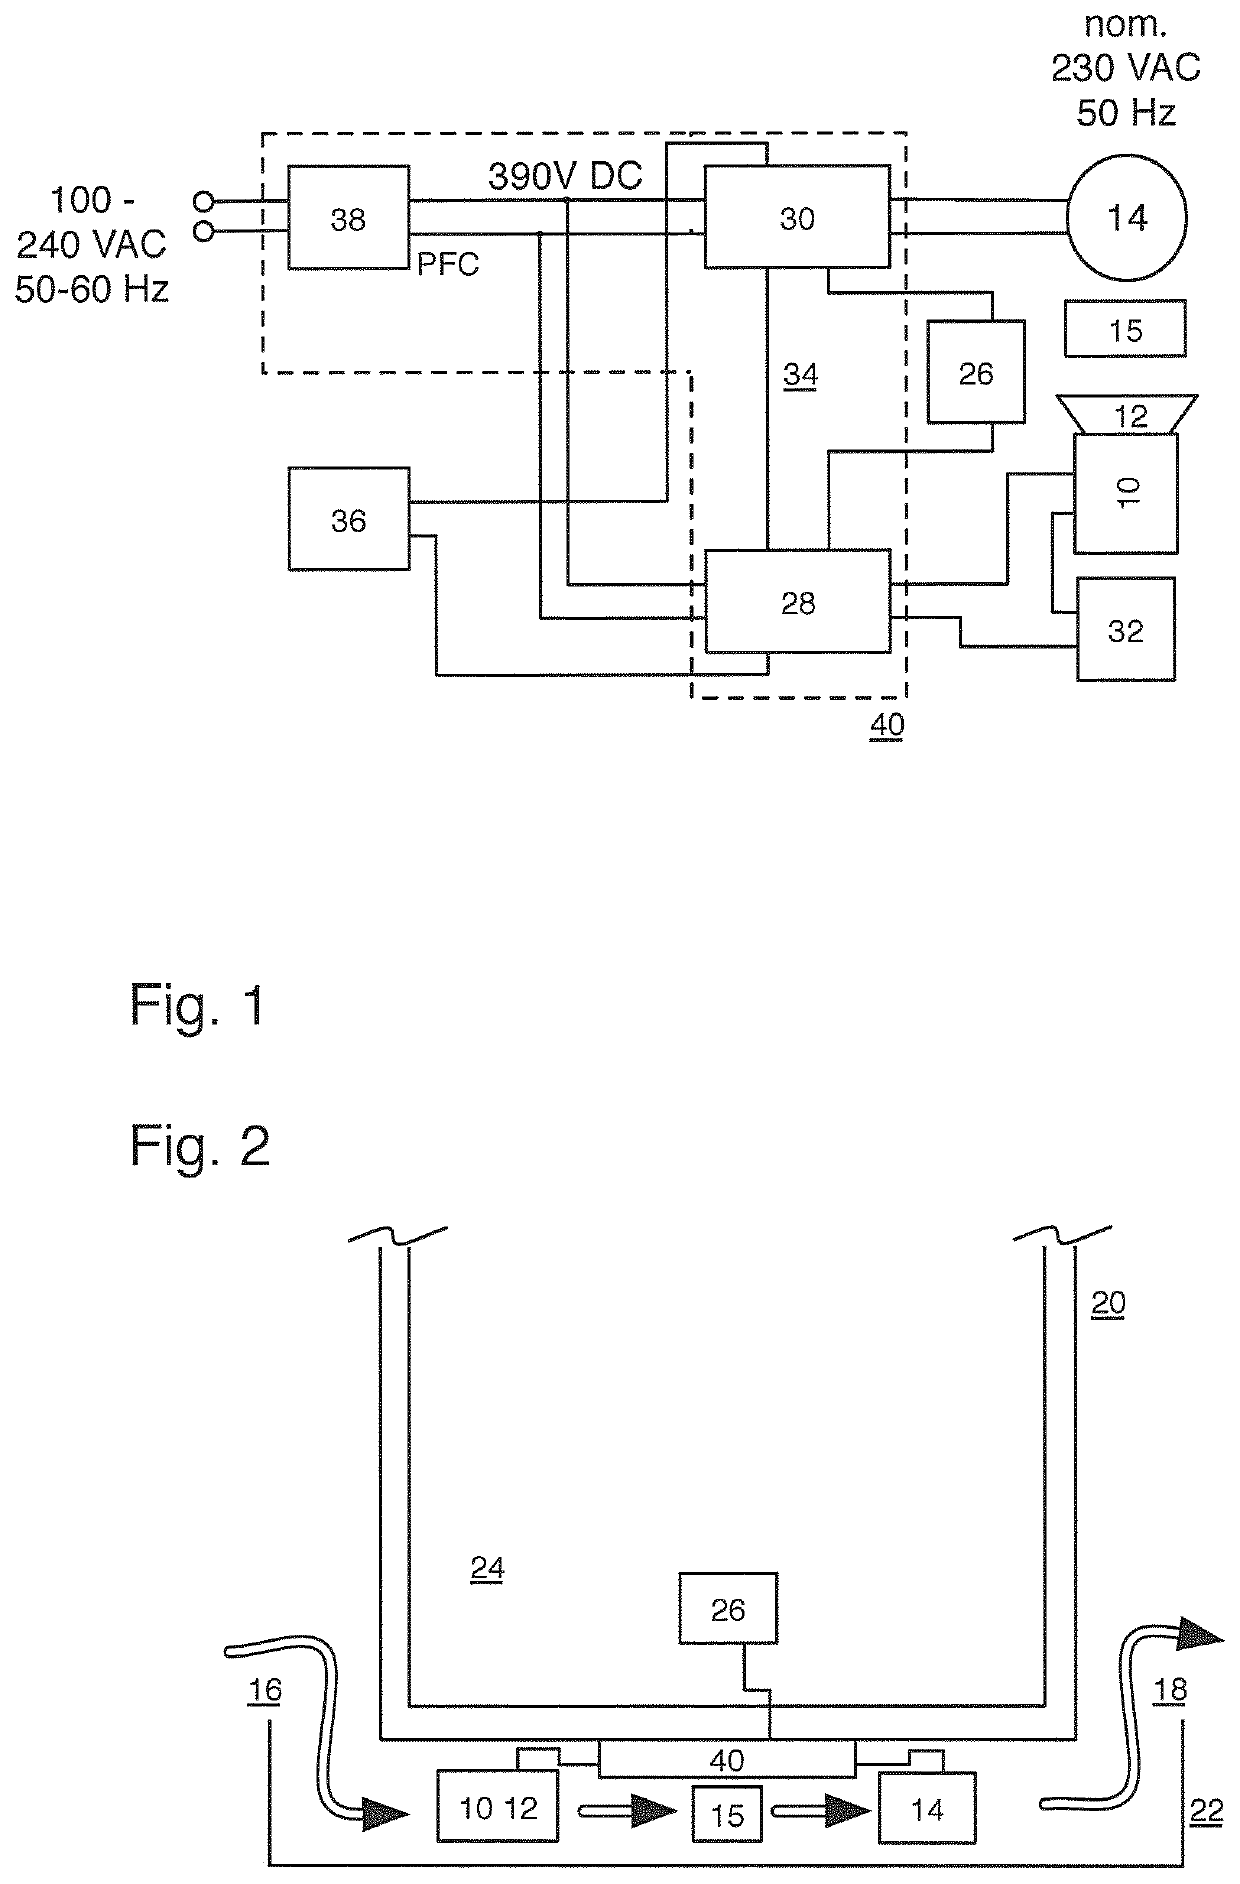 Refrigerator fan device and ultra-low temperature freezer